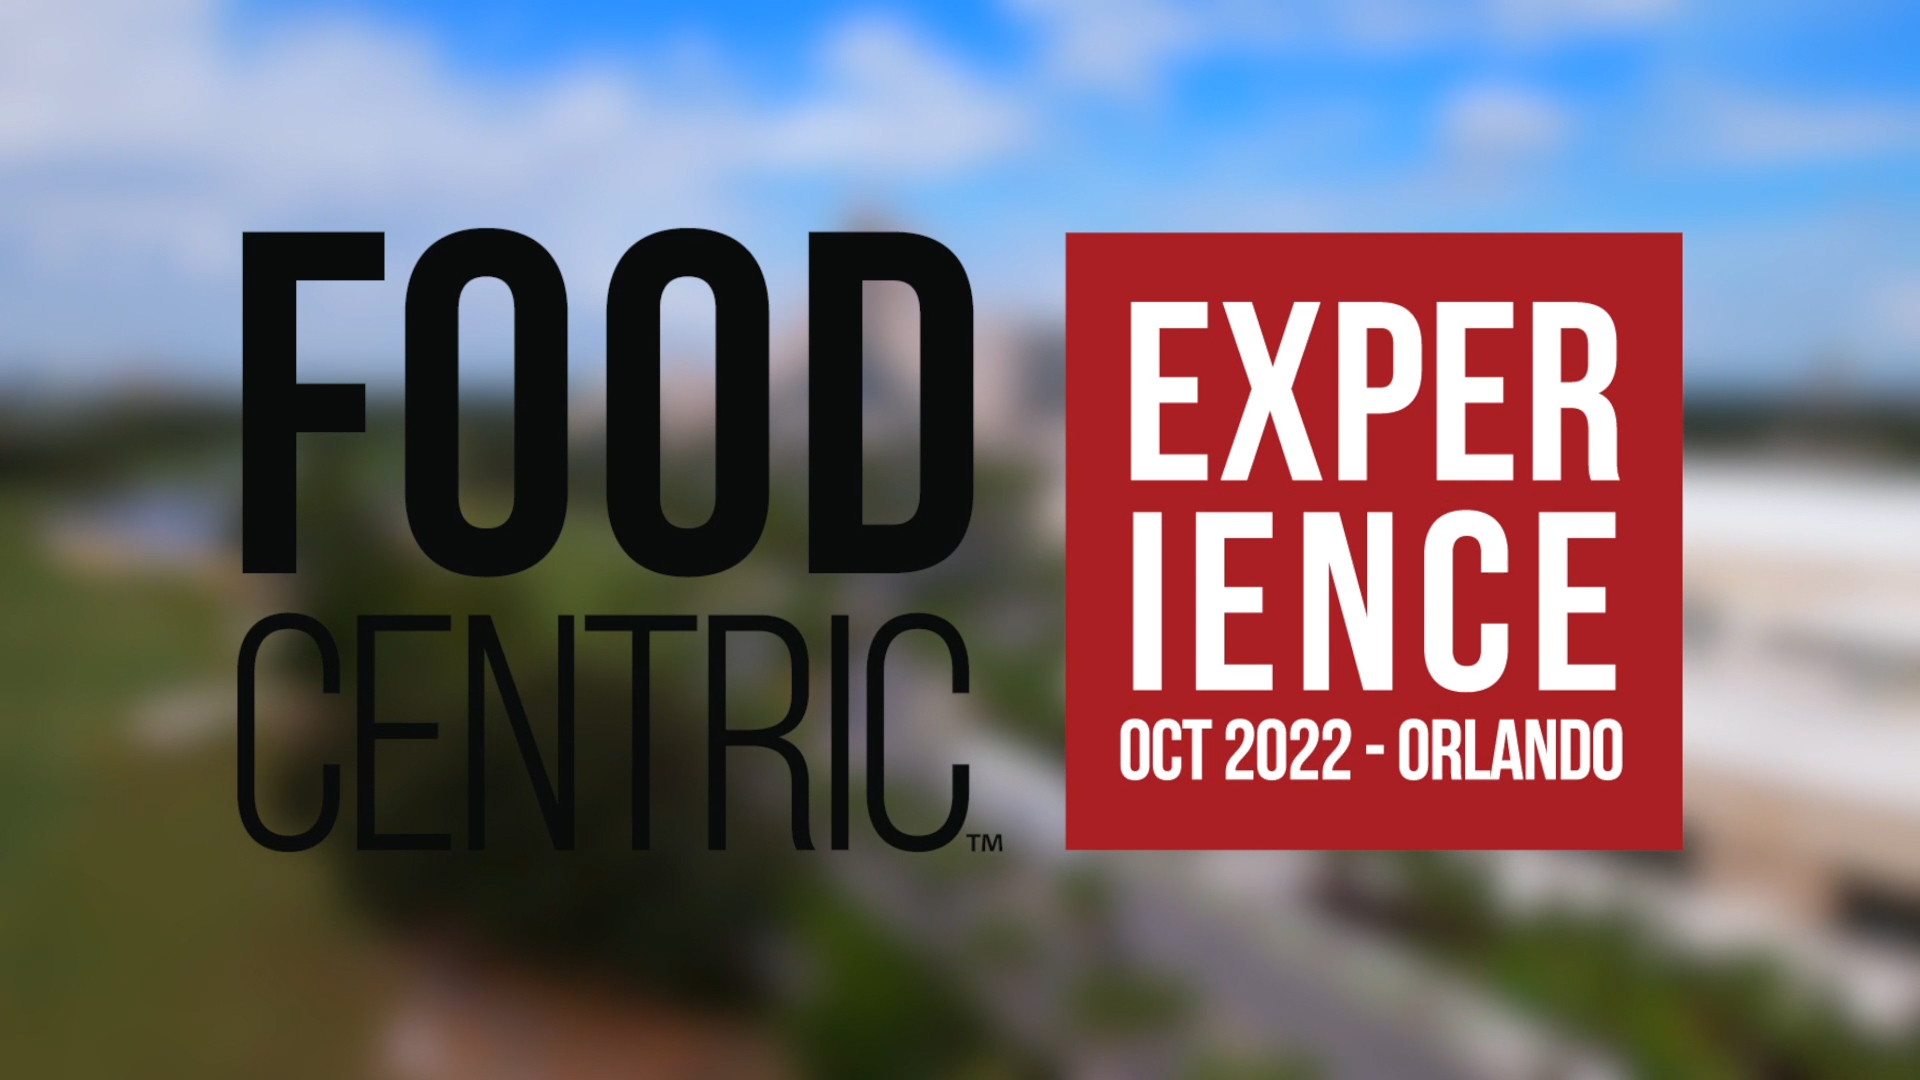 Recap video of 2022 National Foodcentric event held in Orlando, FL.